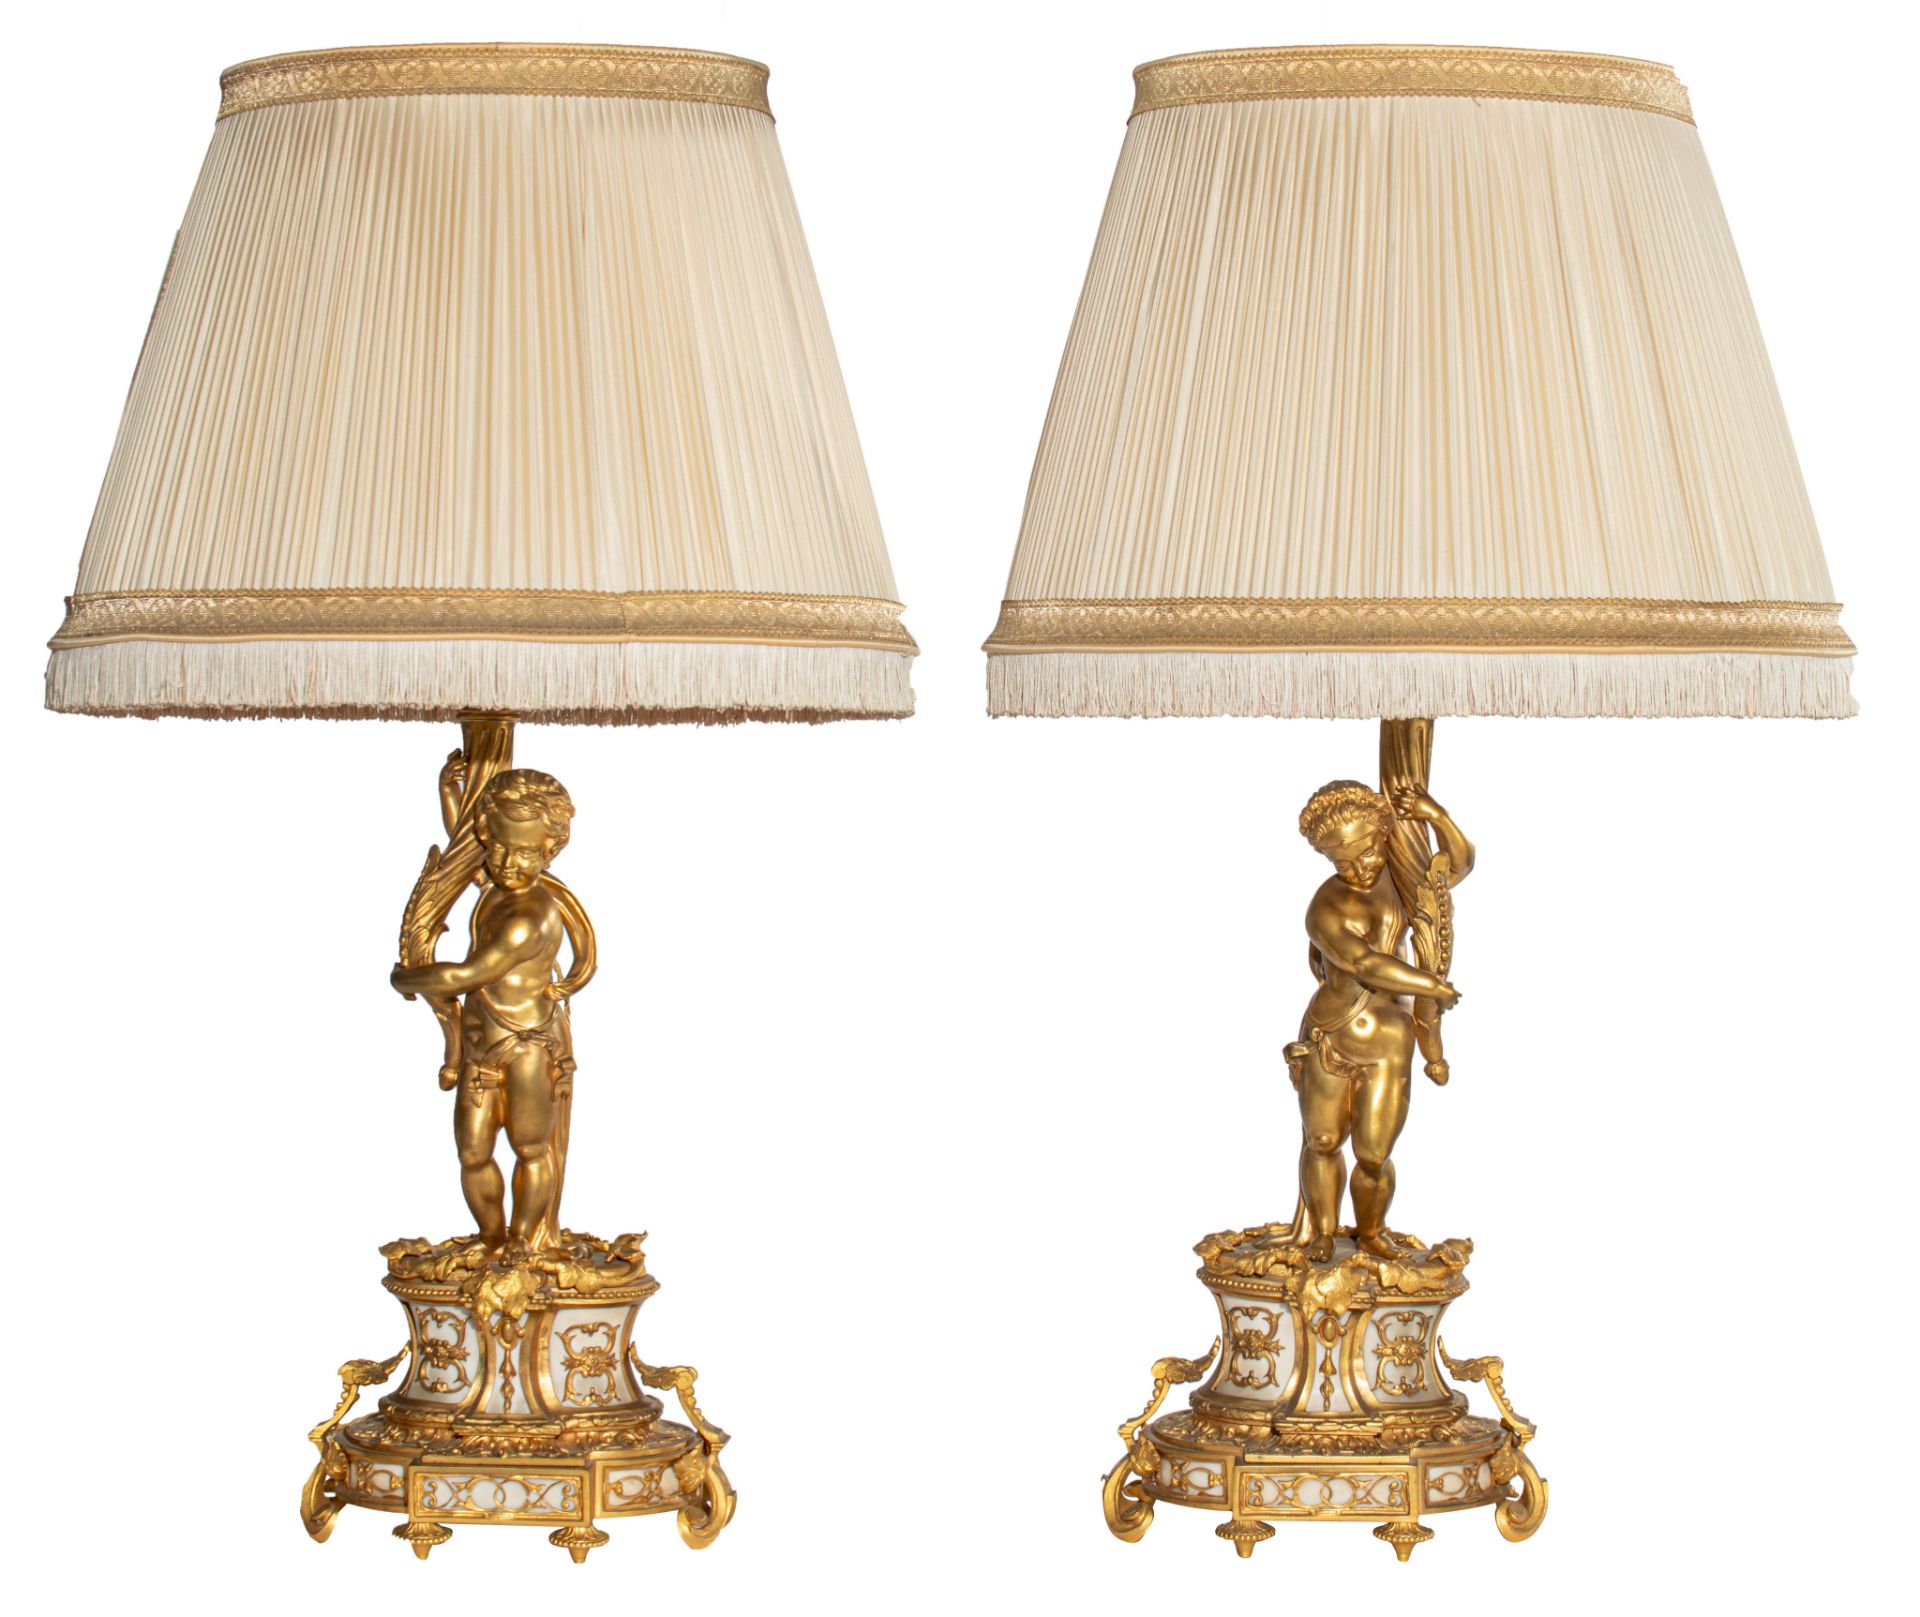 A pair of Neoclassical gilt bronze figural lamps on stands, and a matching pair of sculptures of put